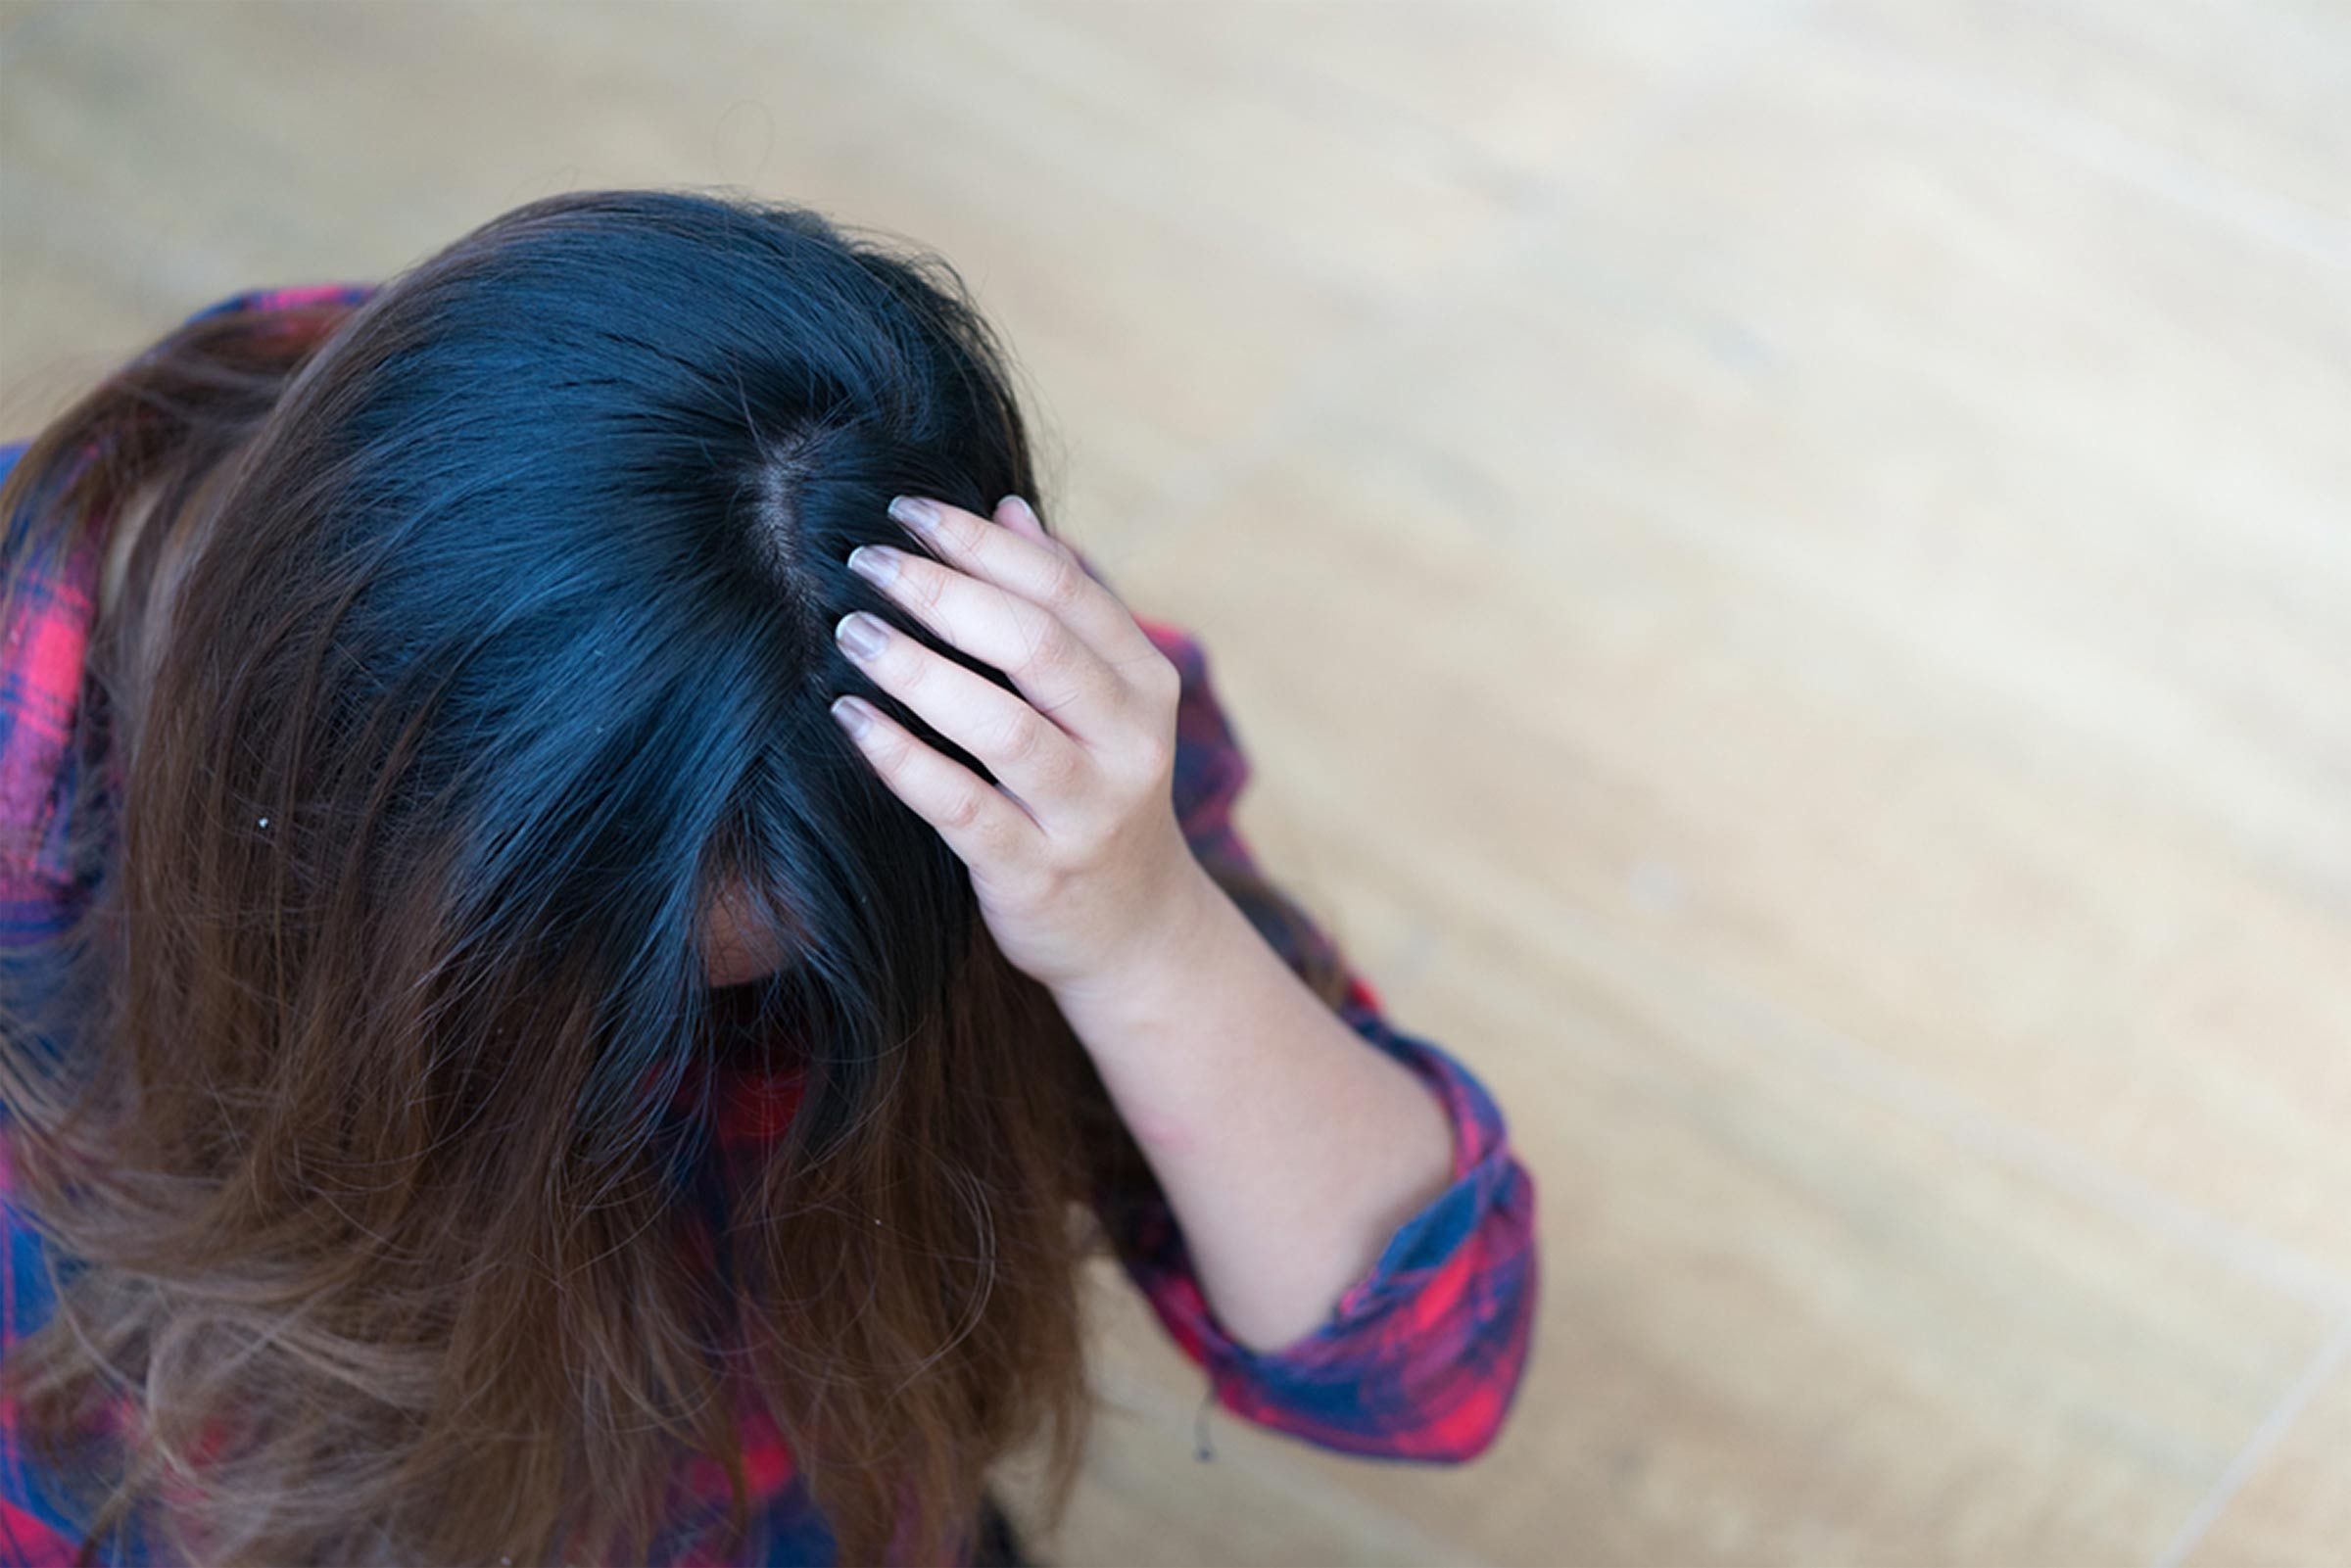 21 Reasons for Your Itchy Scalp (Besides Head Lice) | Reader's Digest